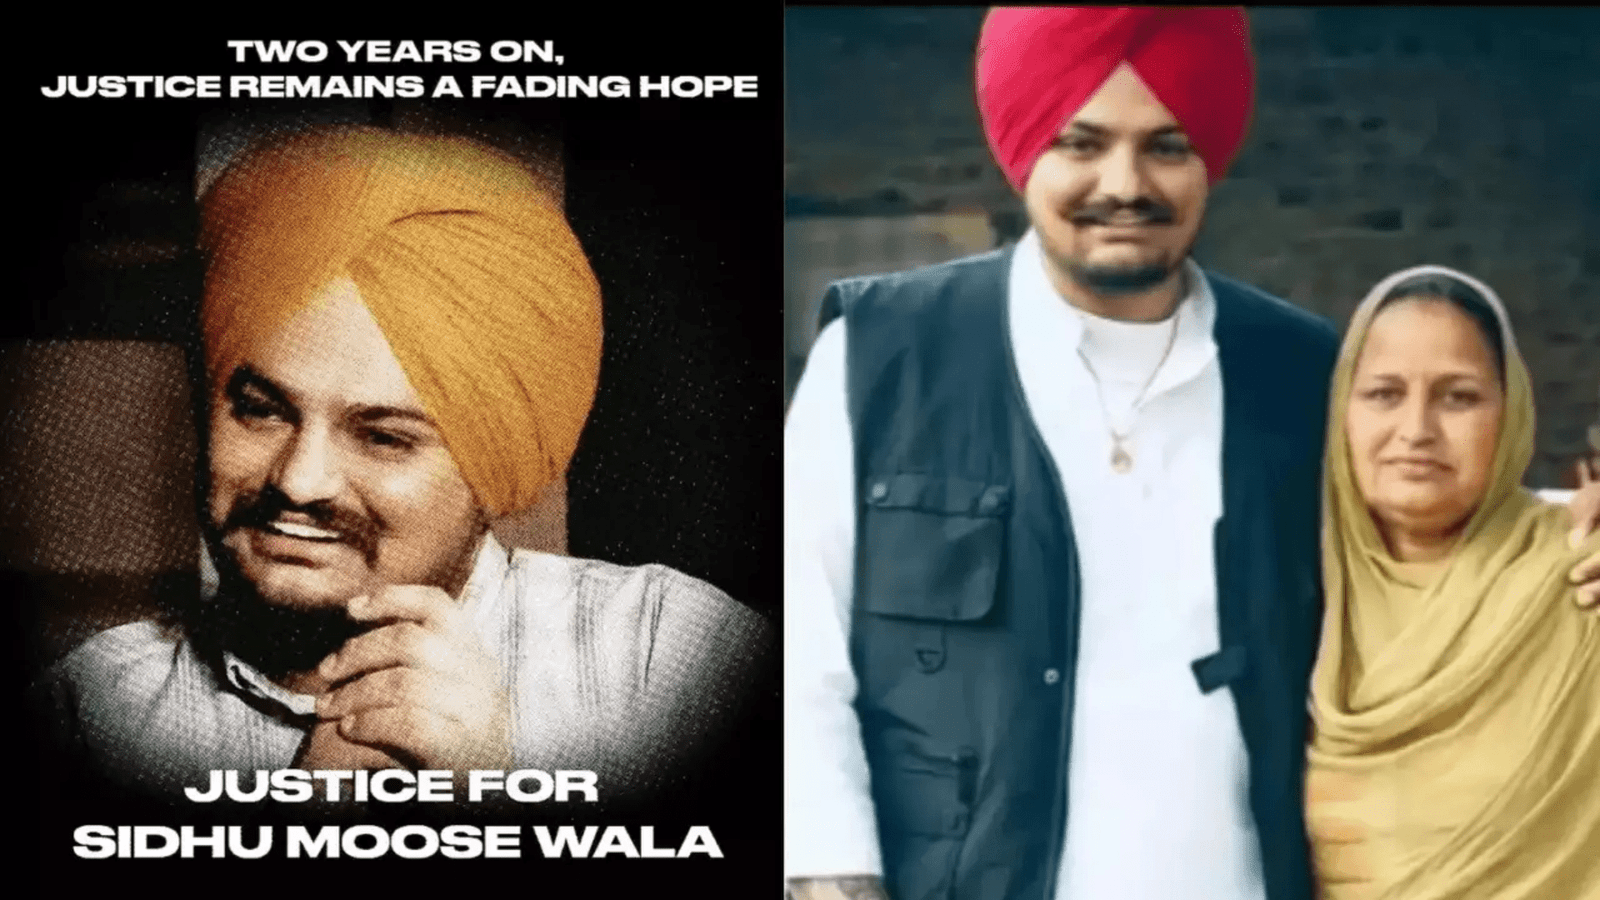 Family honors Sidhu Moosewala on his second death anniversary